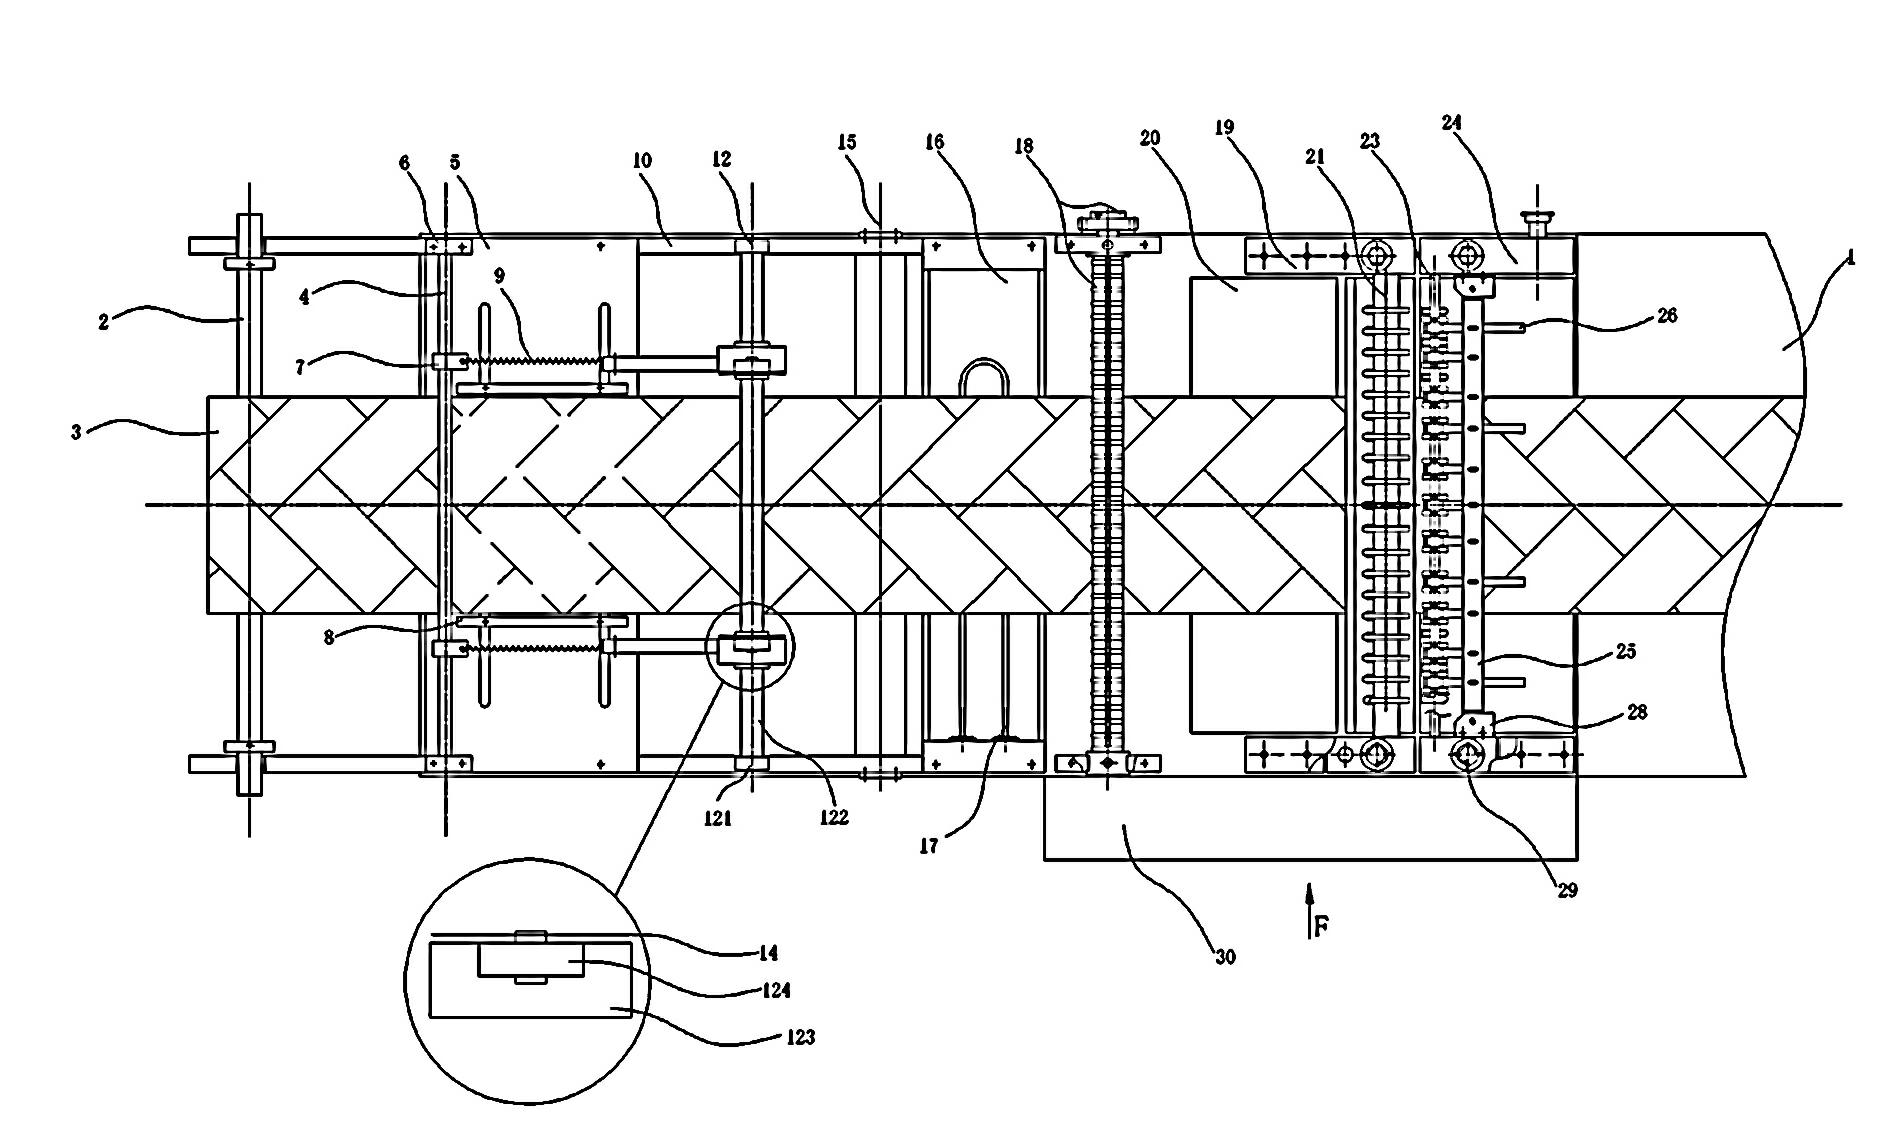 Paper filtering and folding machine of full-automatic filter